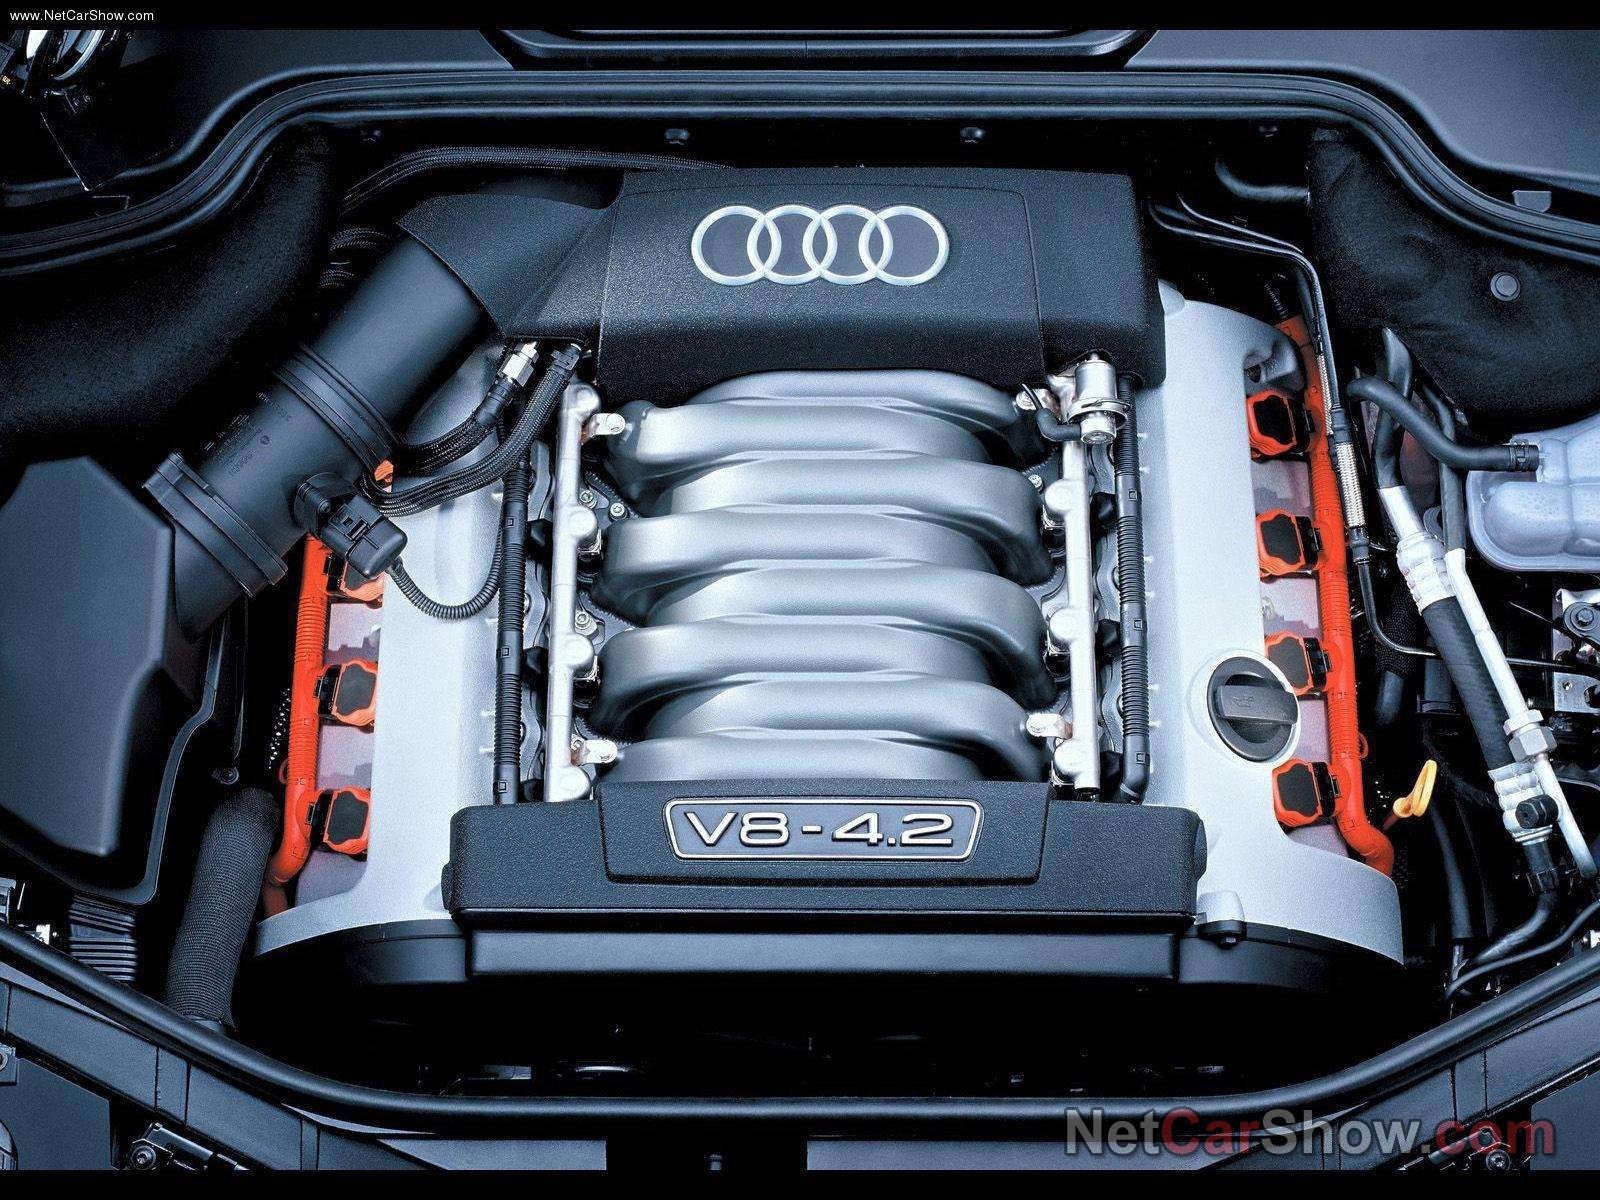 Audi A8 Engine Bay Related Keywords & Suggestions - Audi A8 